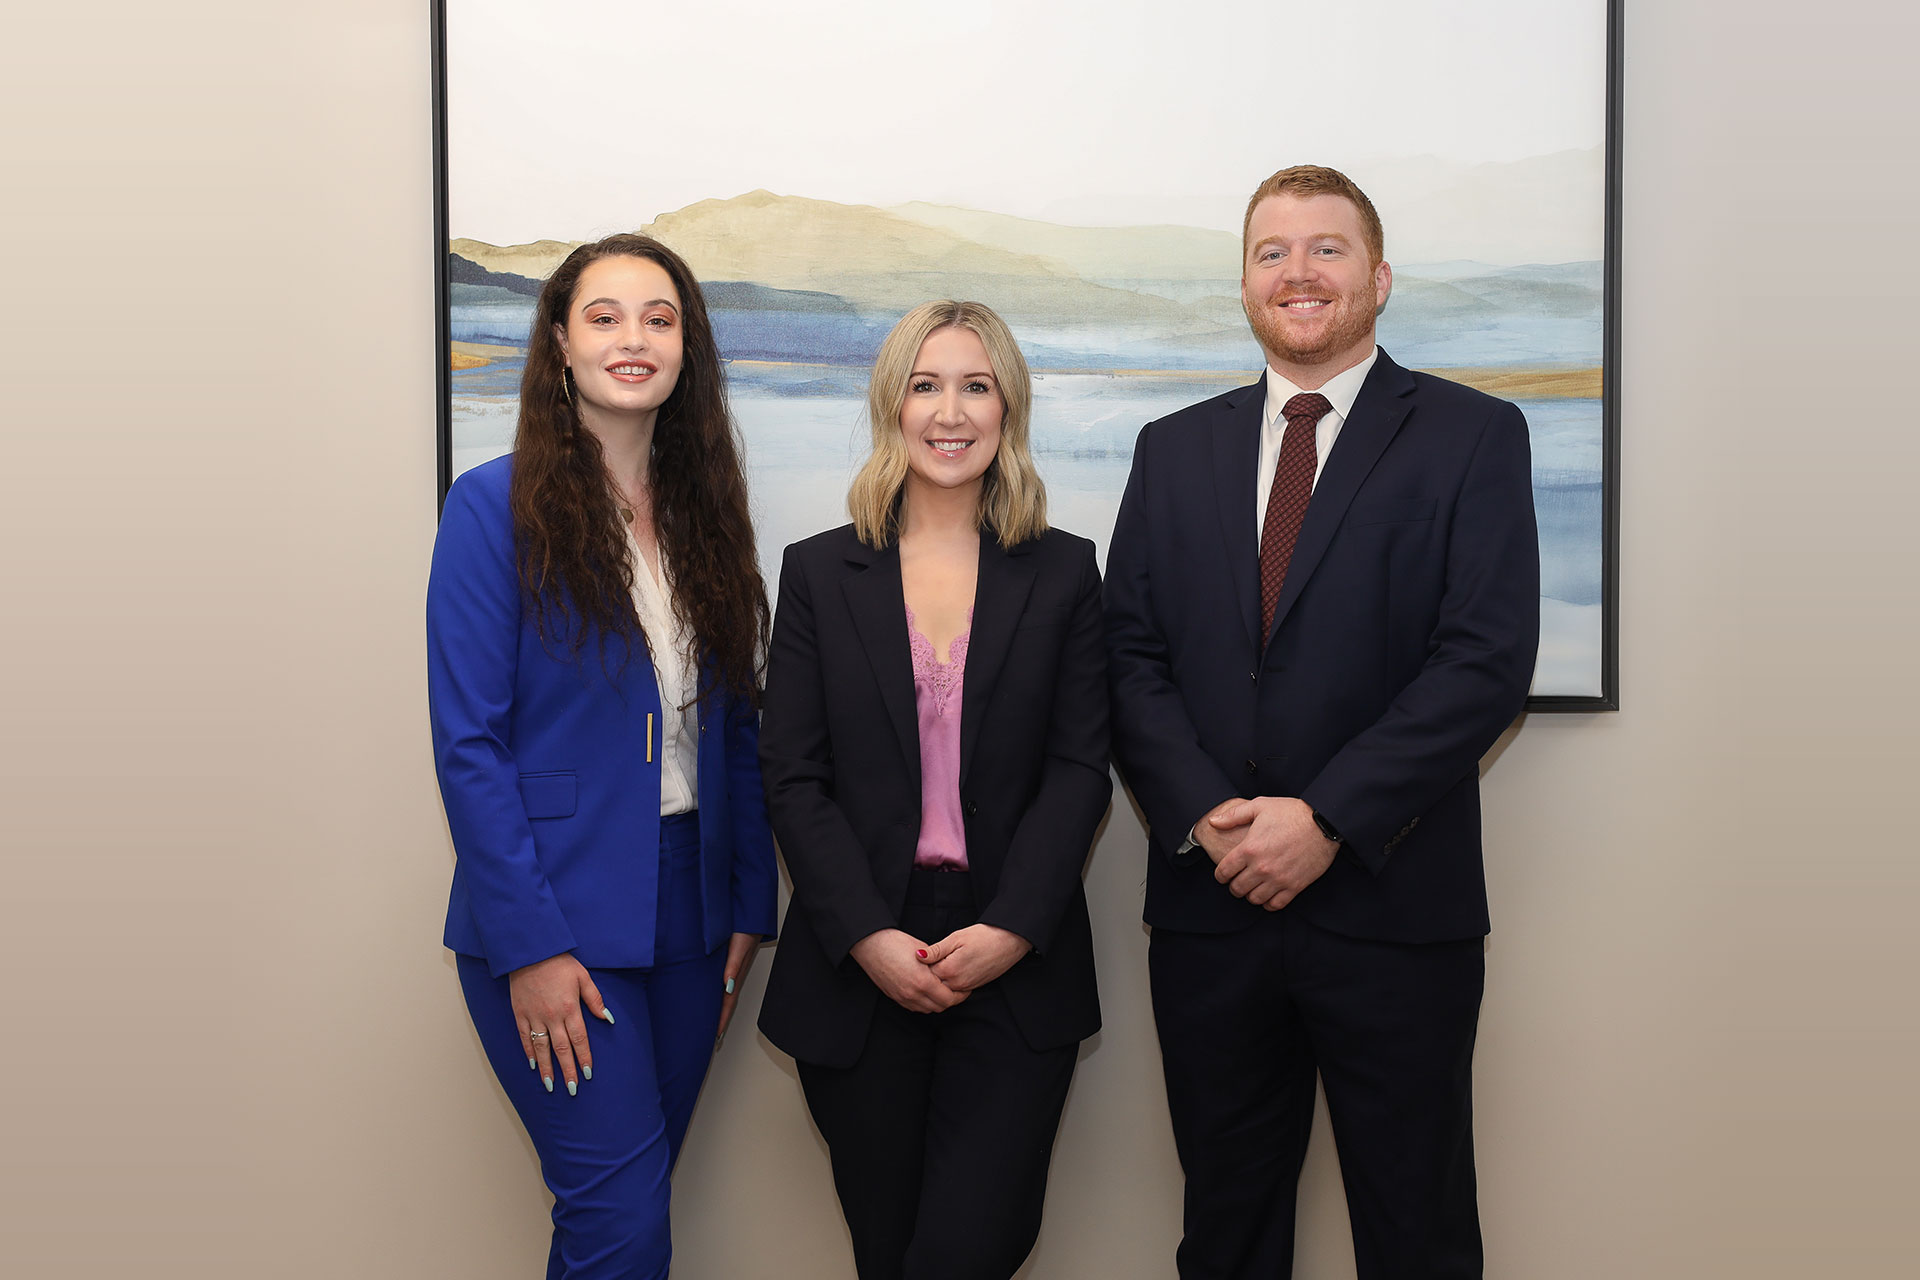 Crouse Law Group attorneys